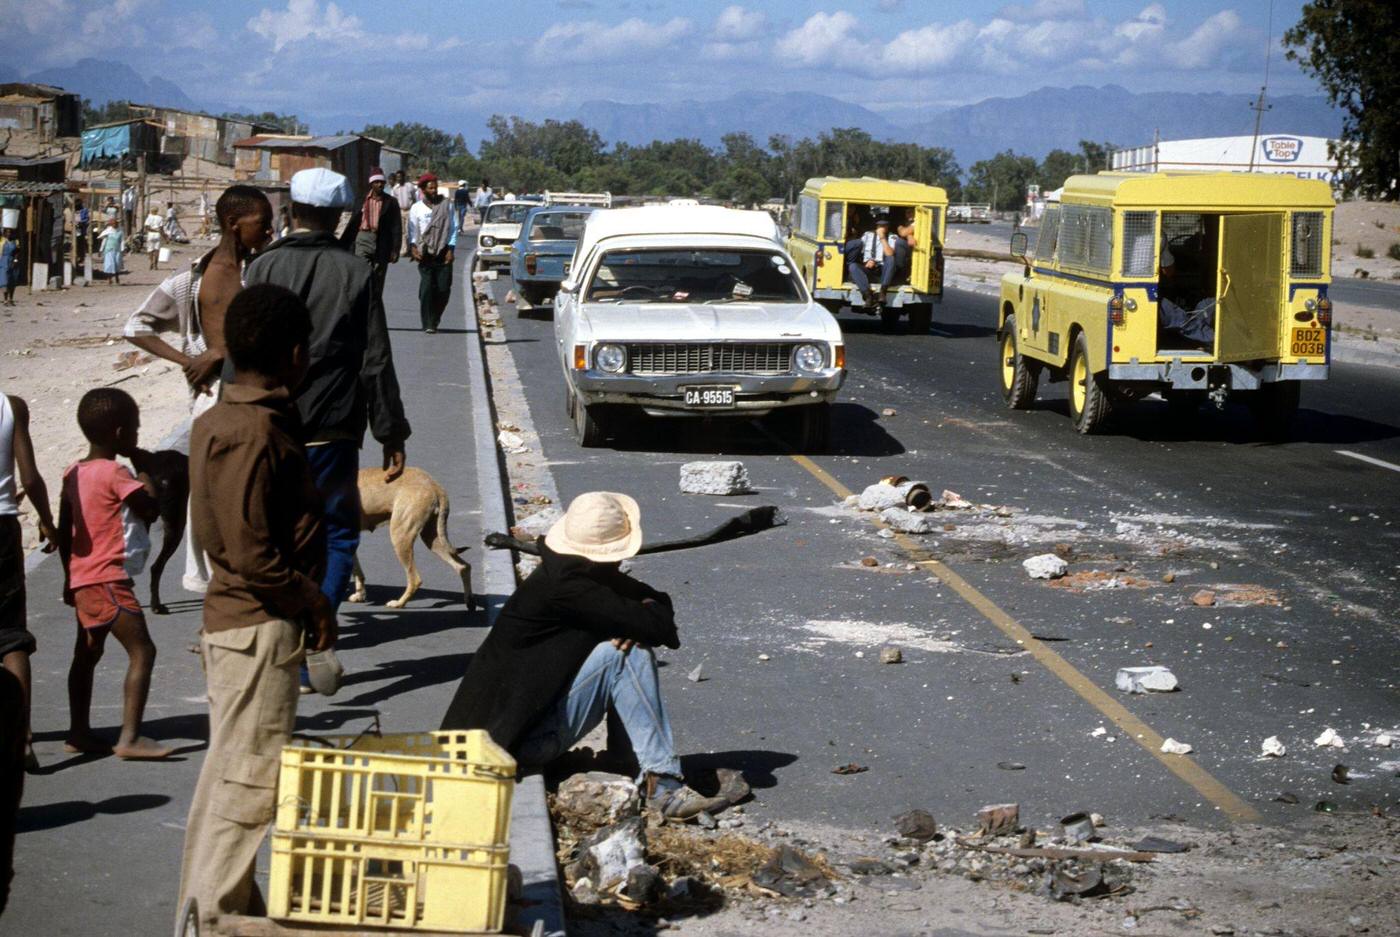 People on a sidewalk watch as South Africa Police Land Rovers drive past debris on a road in the Crossroads shantytown, Cape Town, 1985